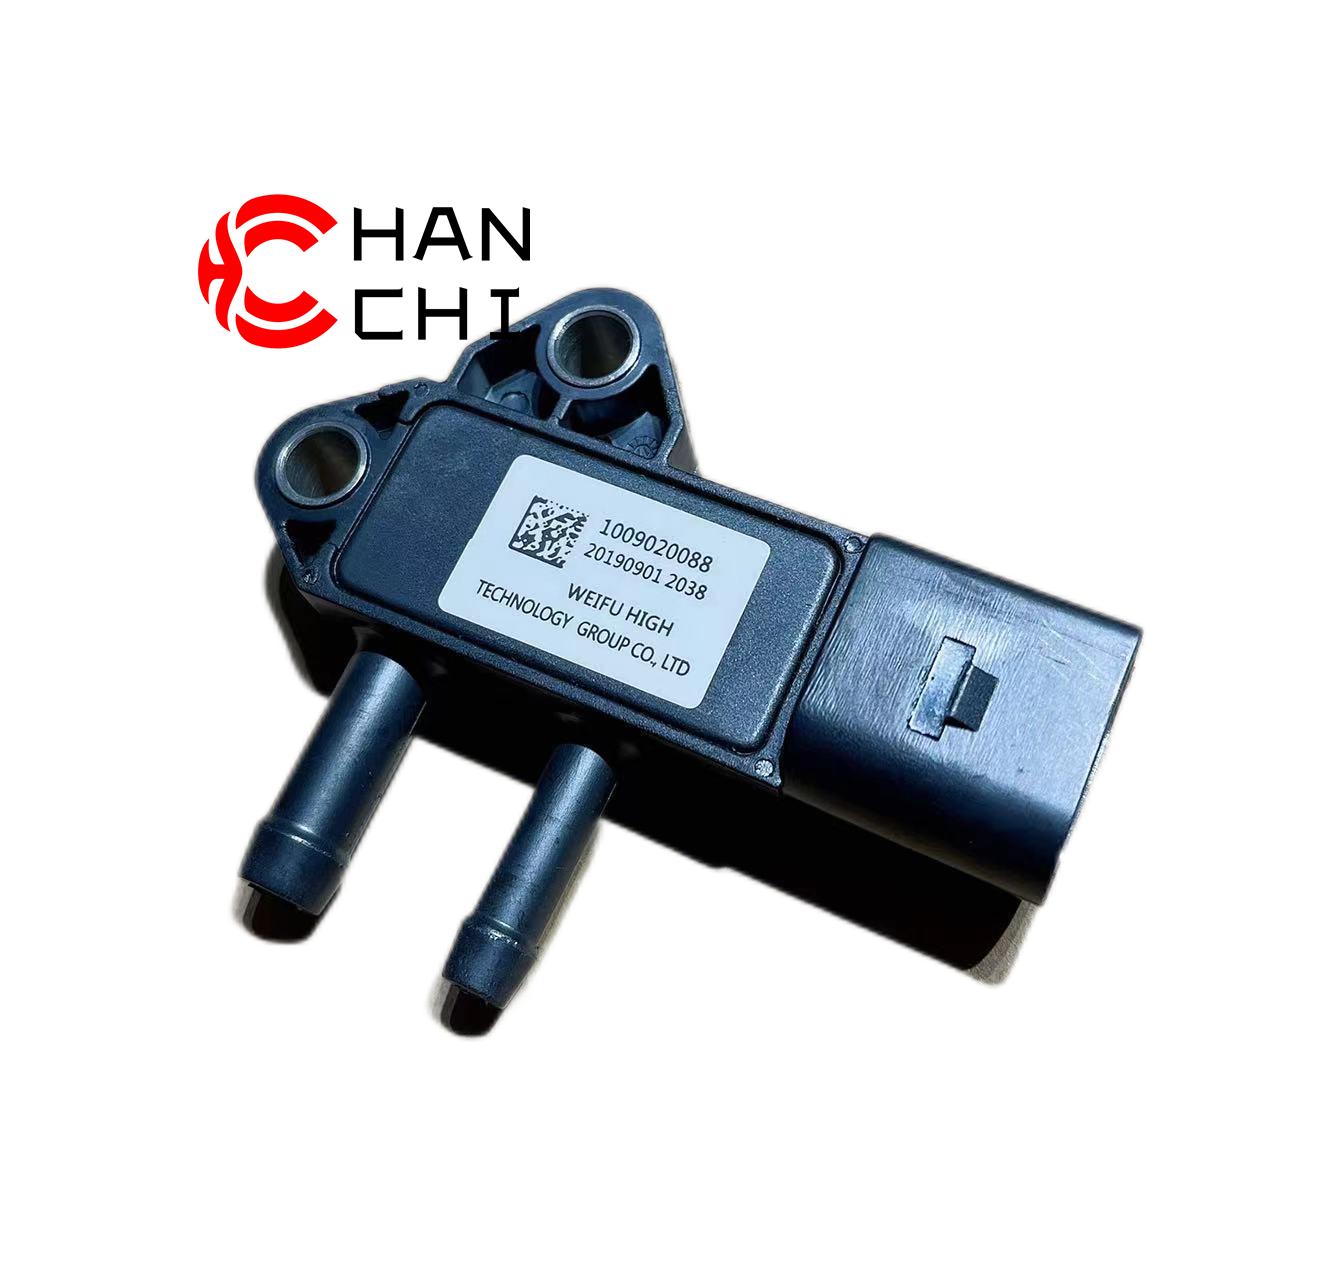 OEM: 1009020088Material: ABSColor: blackOrigin: Made in ChinaWeight: 100gPacking List: 1* Diesel Particulate Filter Differential Pressure Sensor More ServiceWe can provide OEM Manufacturing serviceWe can Be your one-step solution for Auto PartsWe can provide technical scheme for you Feel Free to Contact Us, We will get back to you as soon as possible.